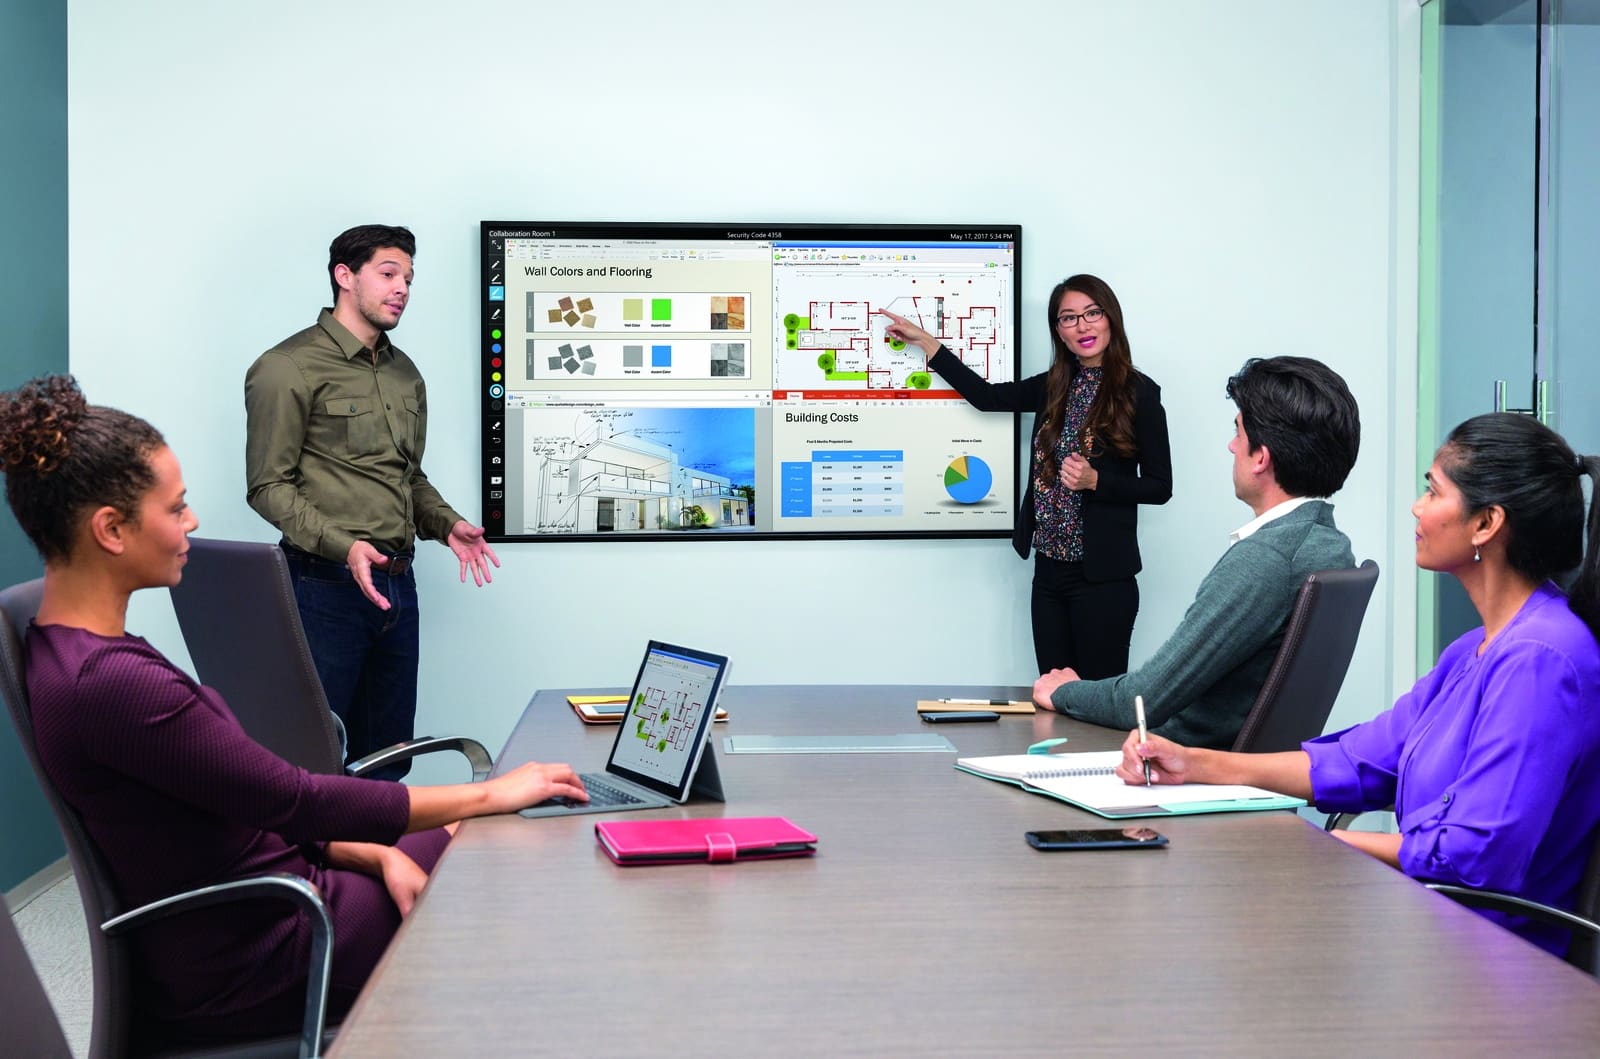 The Polycom Pano Is The Best Content Sharing & Presentation Device